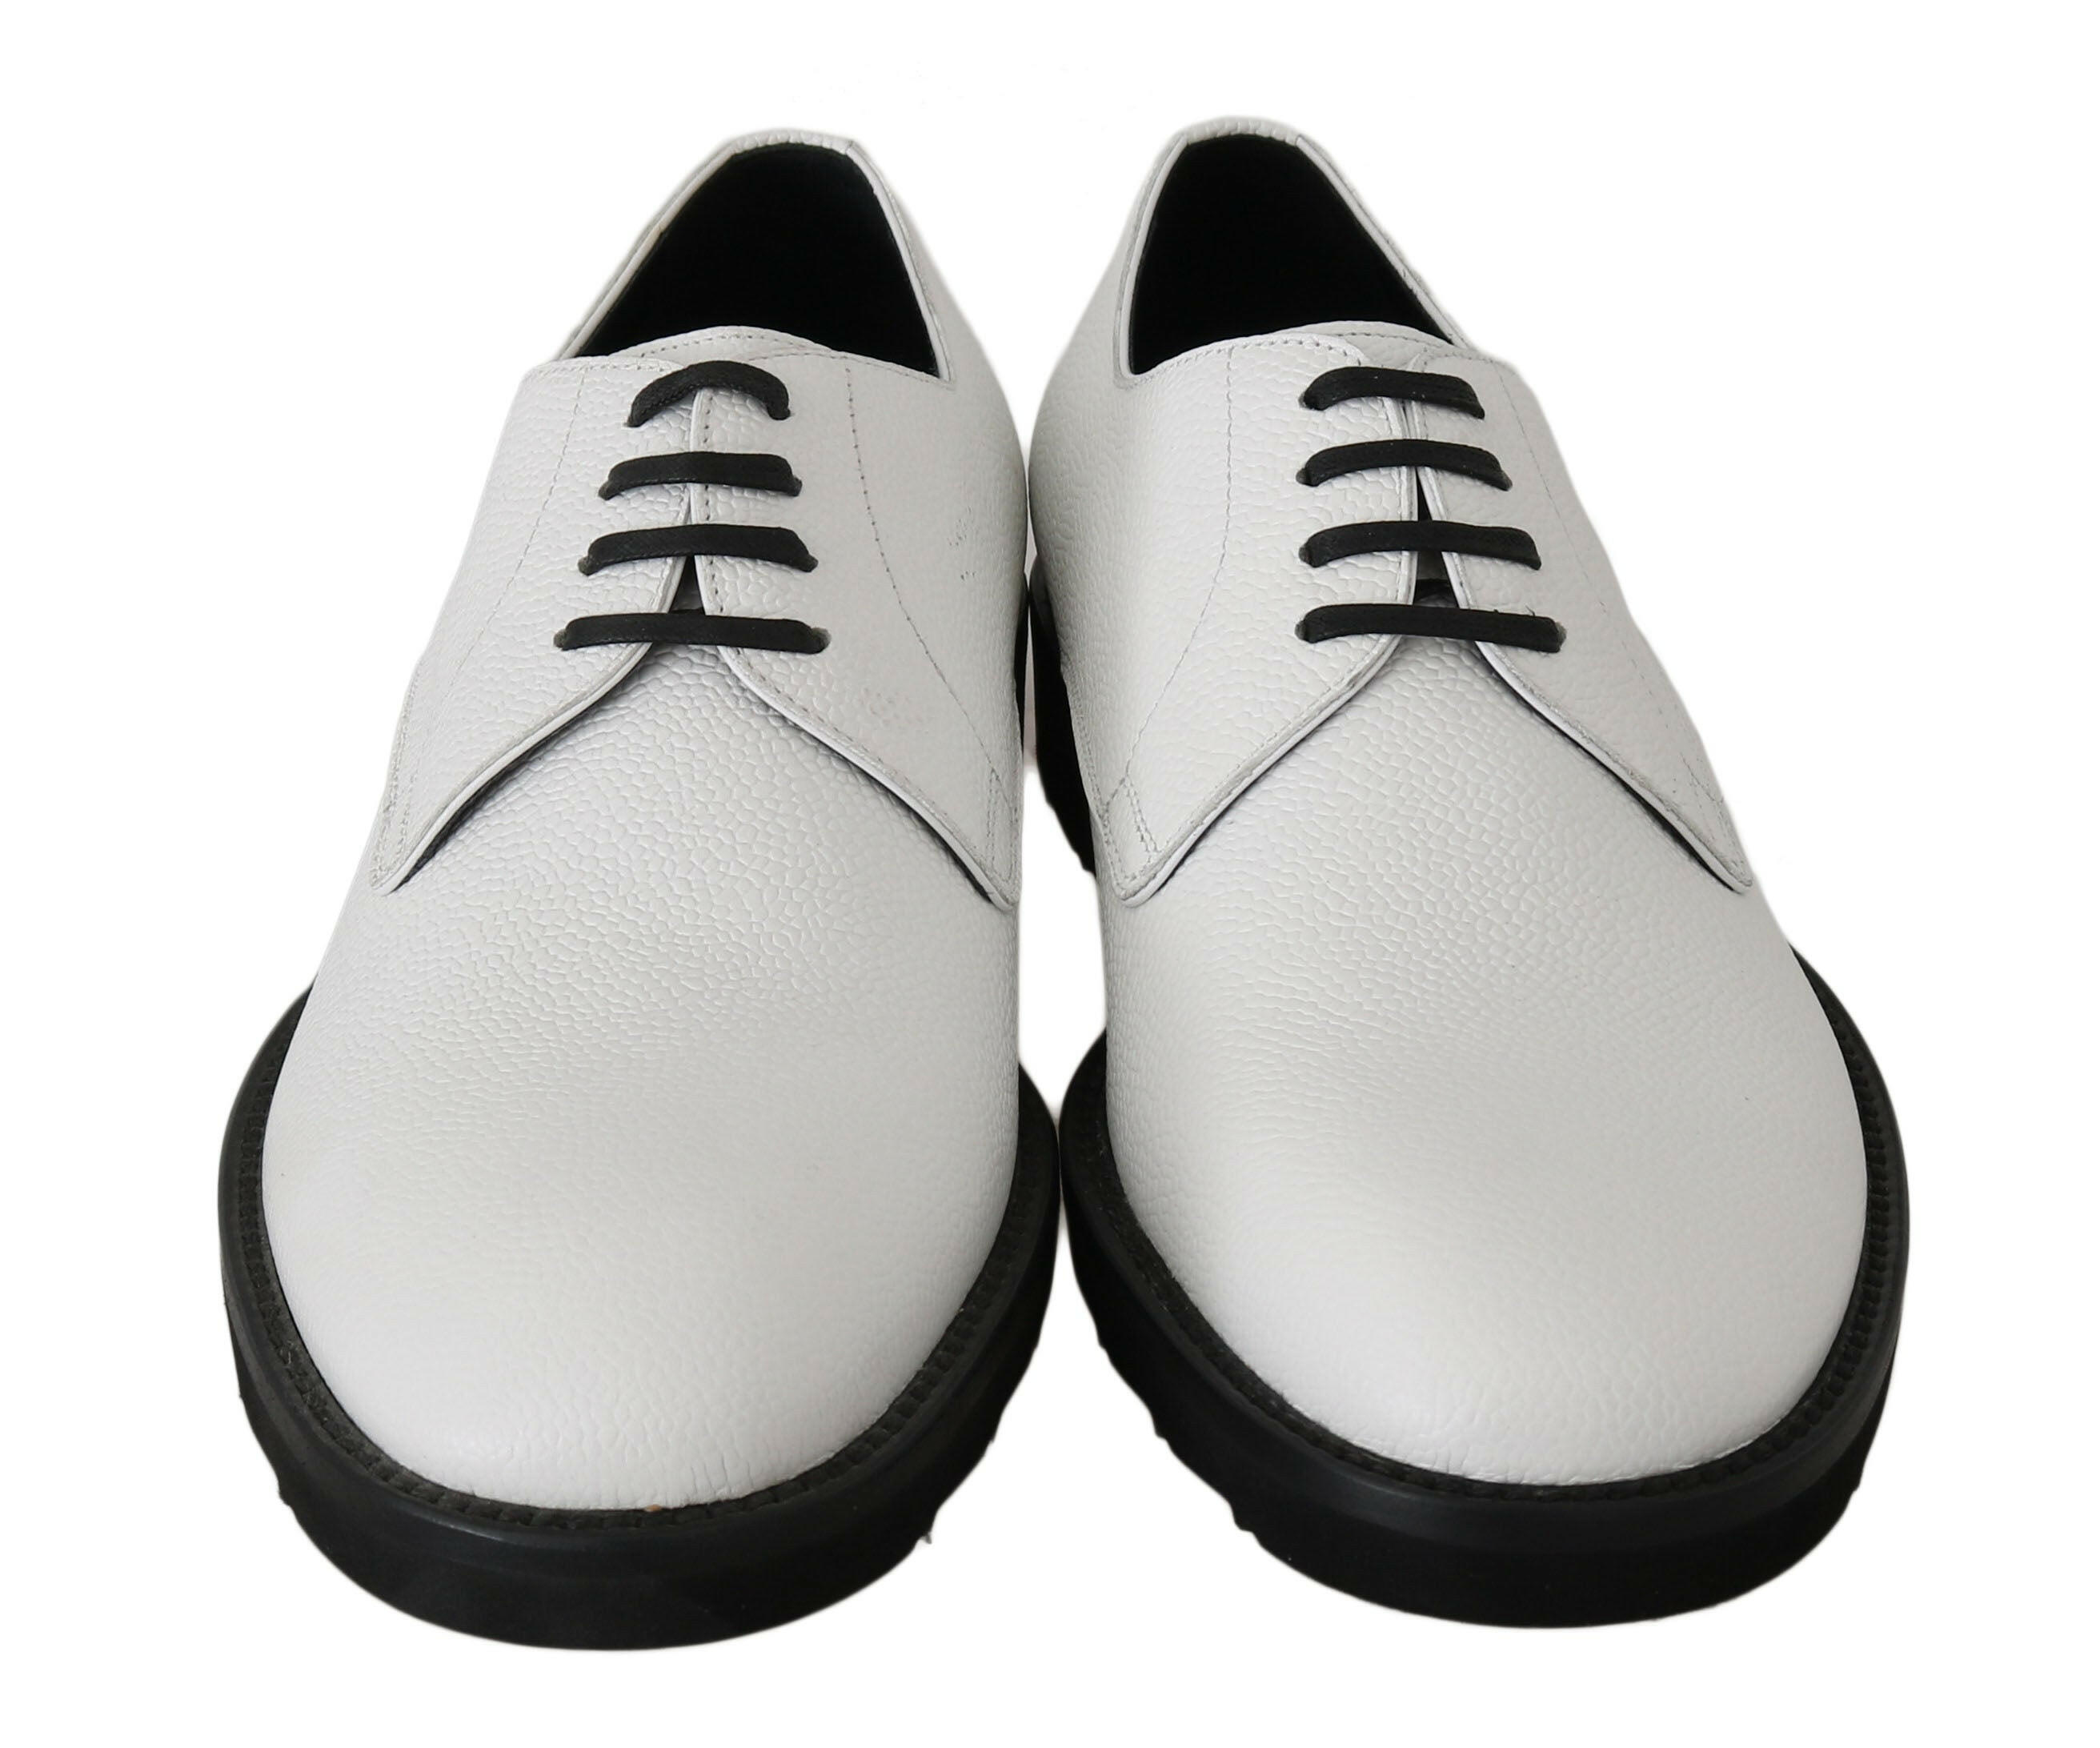 Dolce & Gabbana White Leather Derby Dress Formal Shoes - GENUINE AUTHENTIC BRAND LLC  